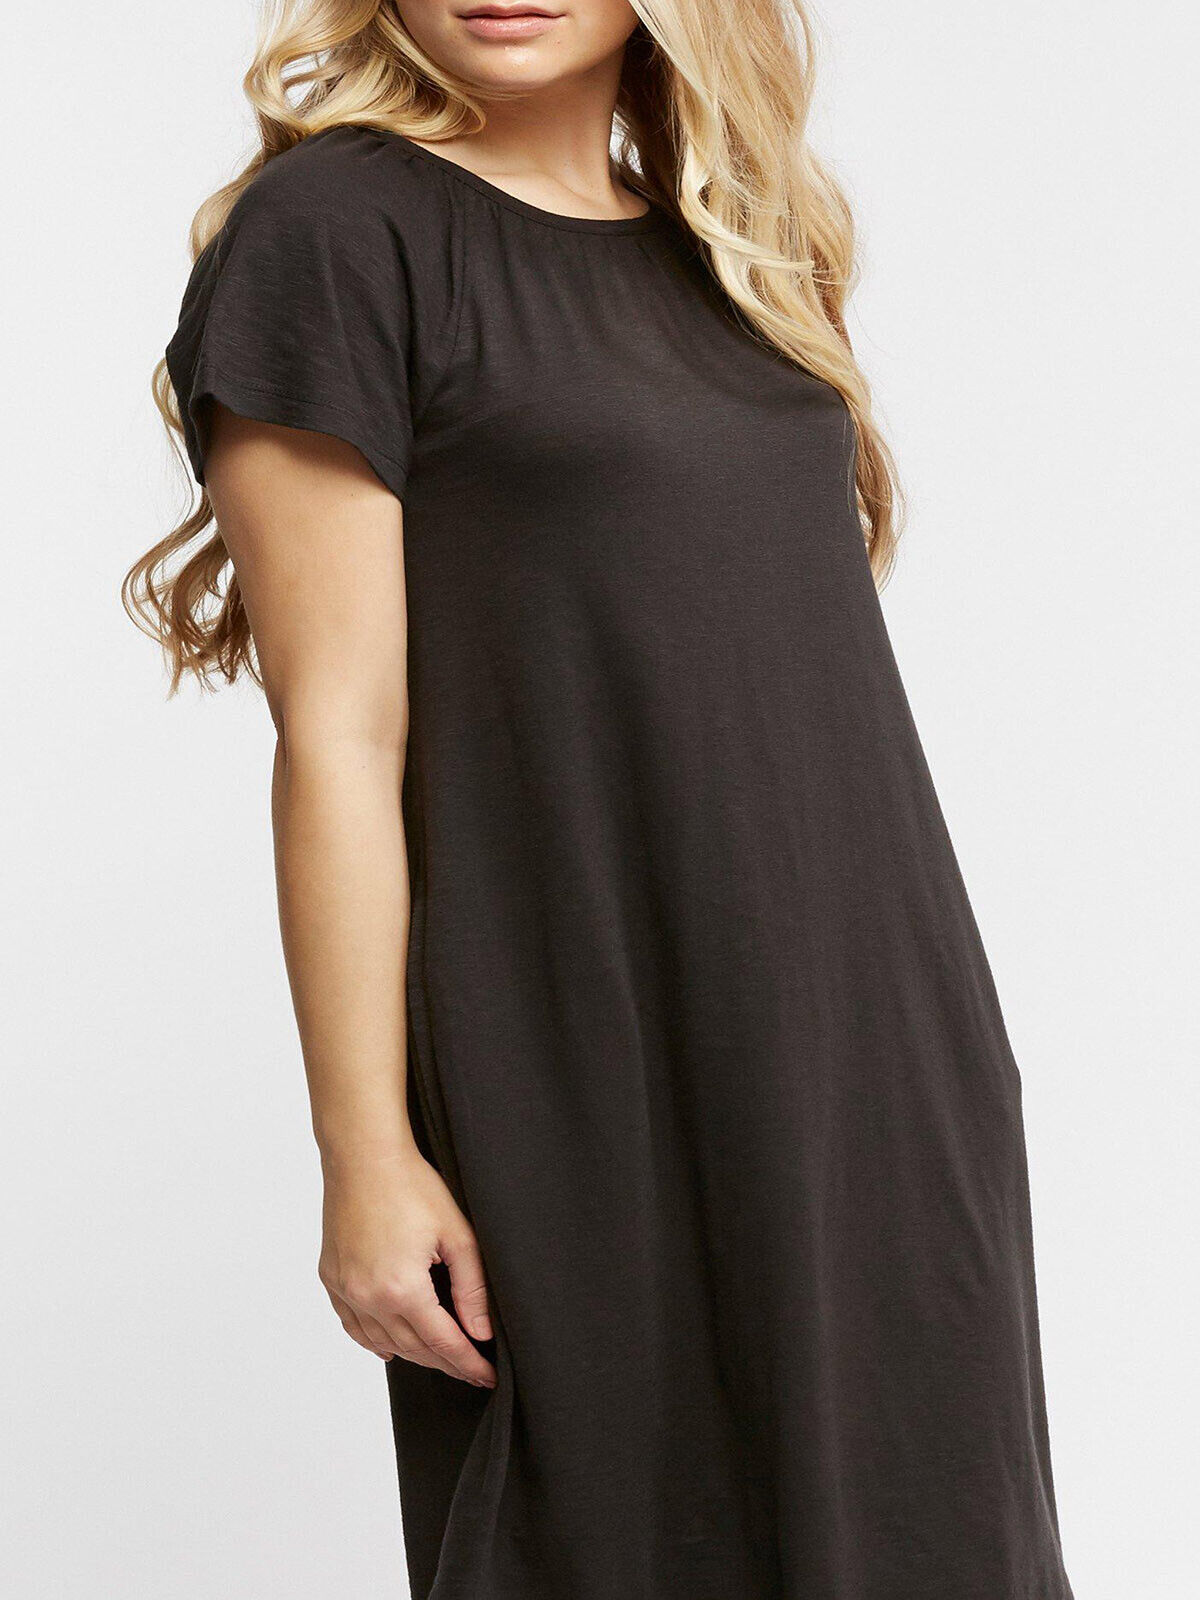 EX Fat Face Black Lucy Cotton Modal Jersey Dress in Sizes 10, 12, 18 RRP £45